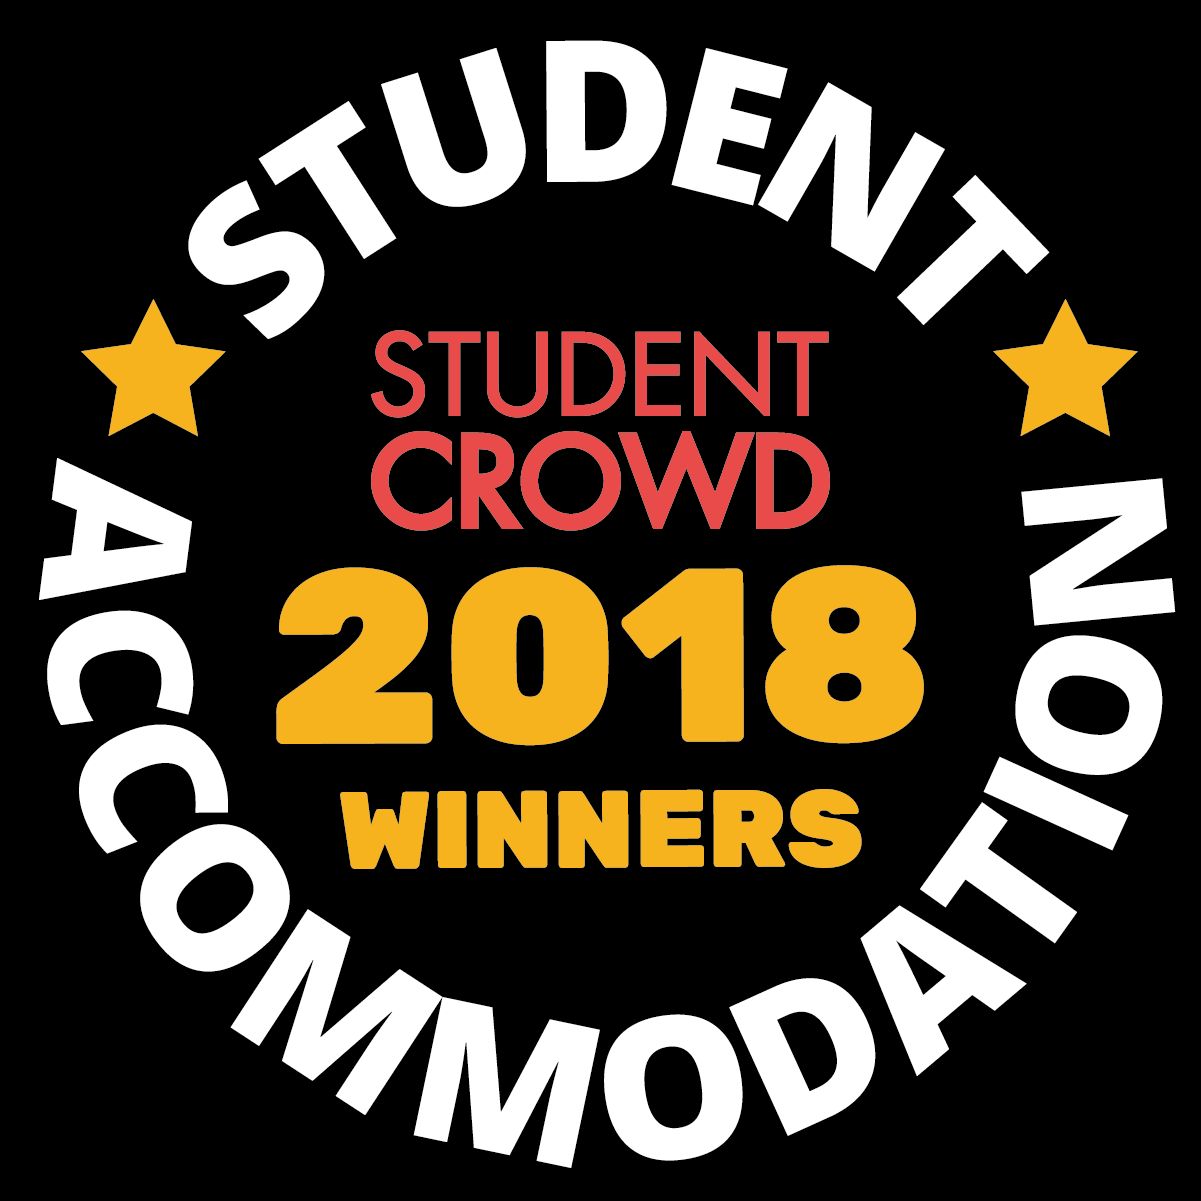 Student Crowd logo badge that also notes Loughborough University as winners of the Best UK University Accommodation for 2018